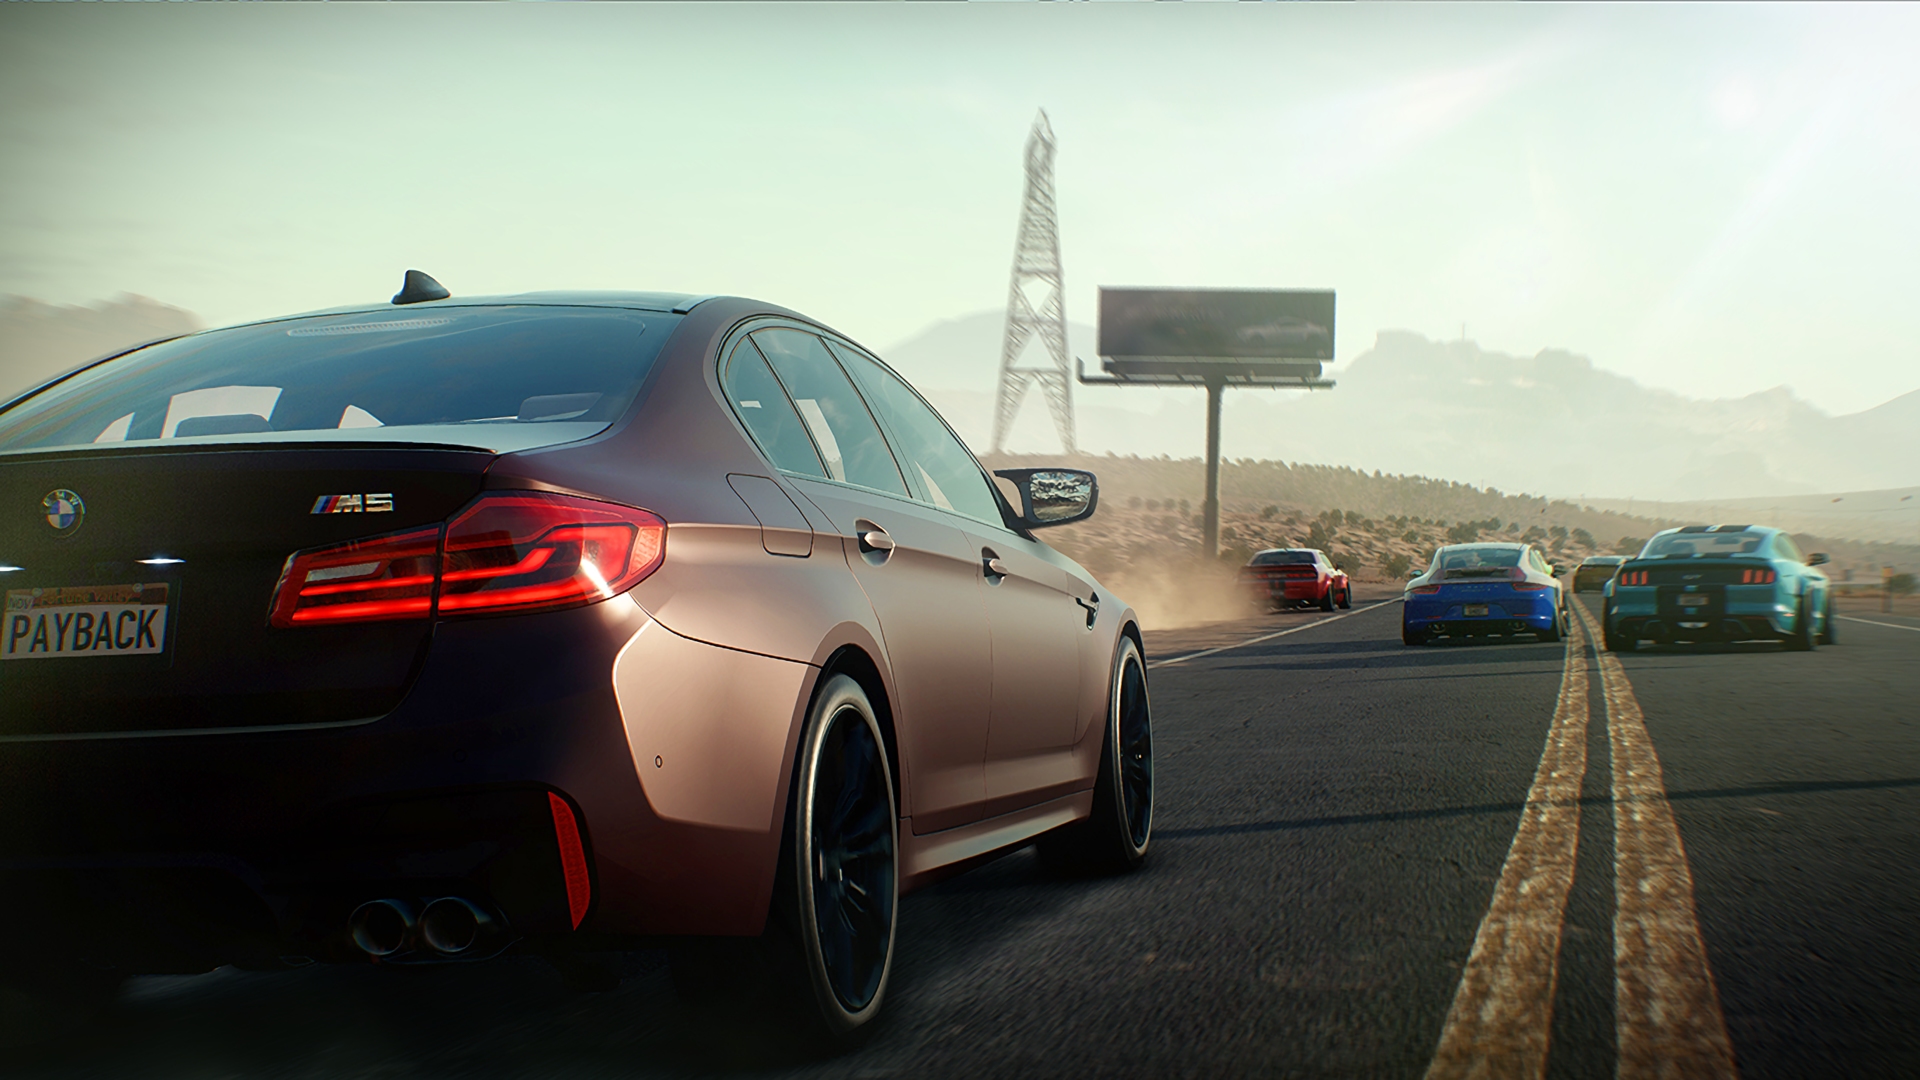 Bmw Bmw M5 Car Need For Speed Need For Speed Payback 1920x1080